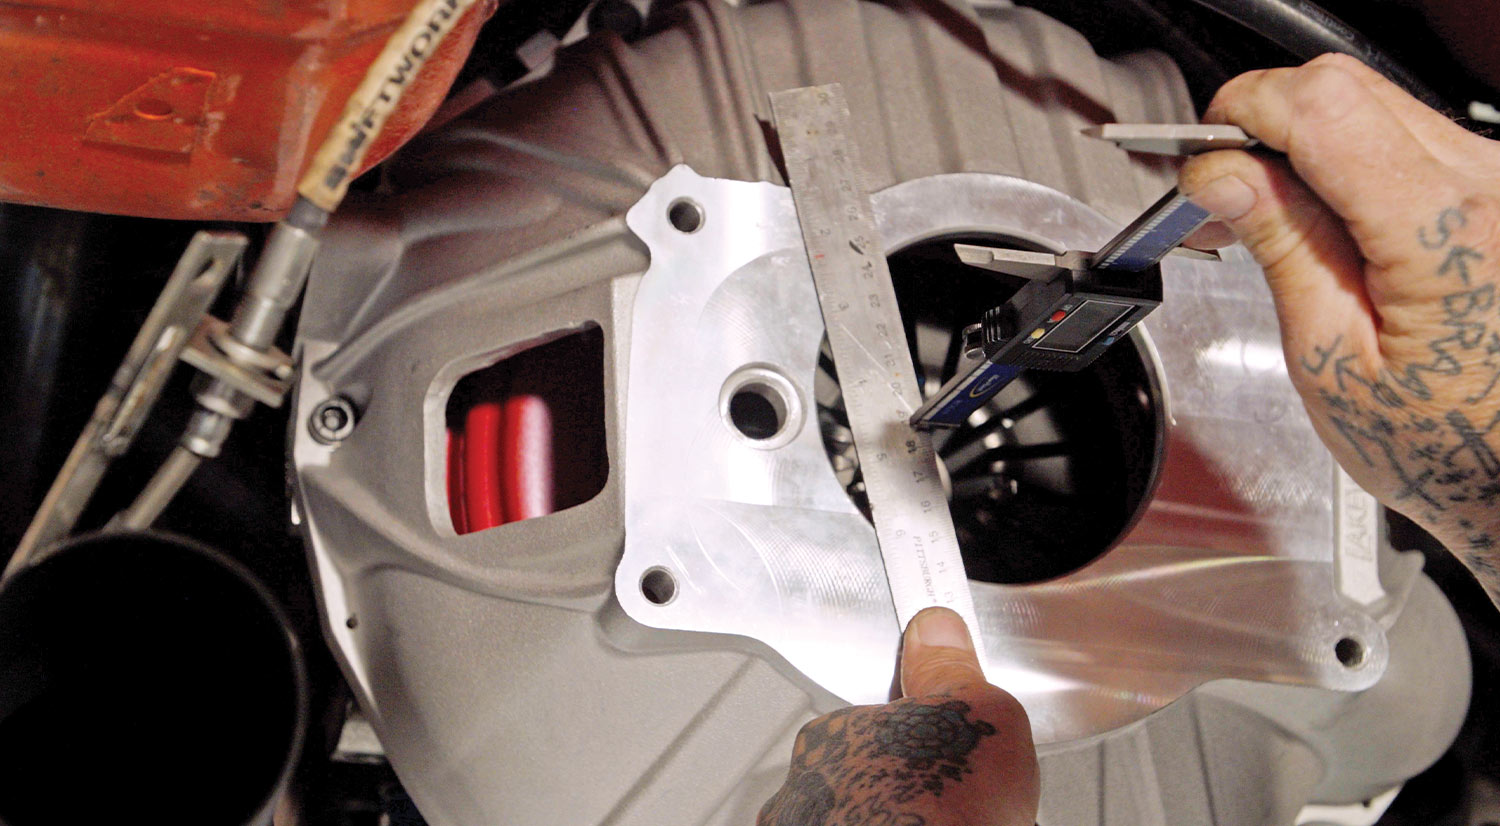 the distance from the clutch fingers to the transmission mounting surface is measured